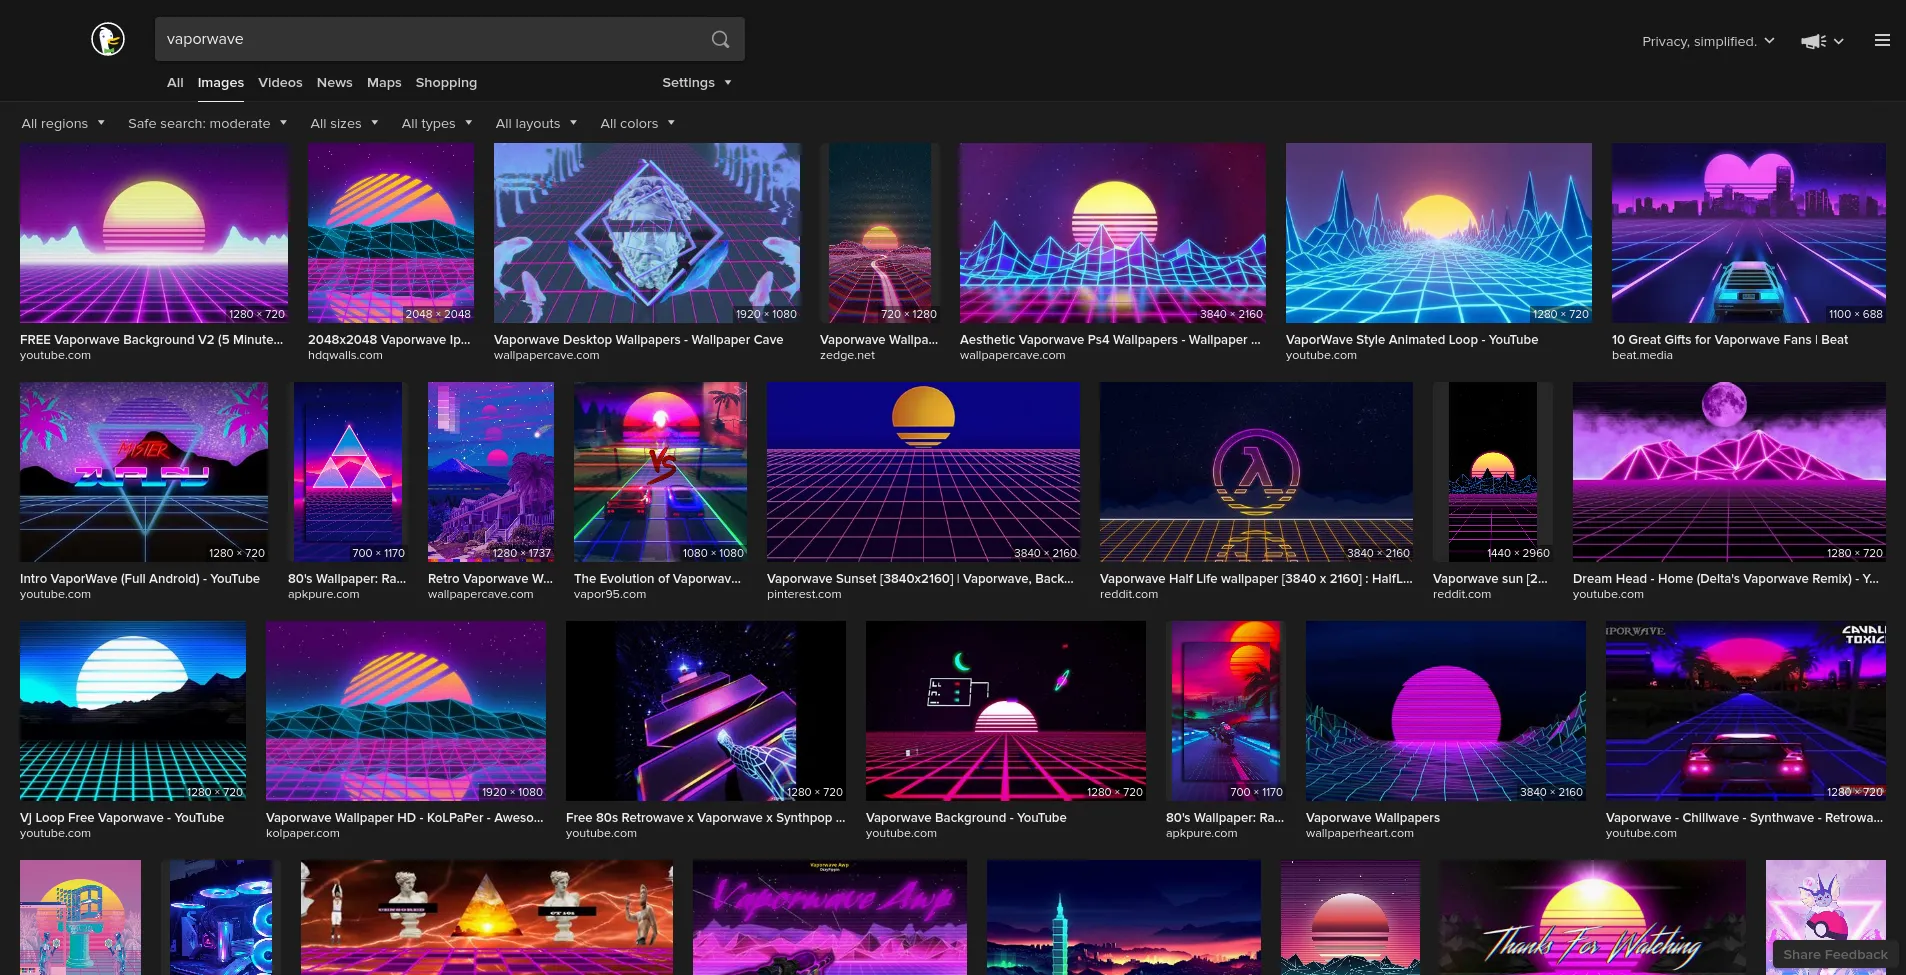 Vaporwave Search
Results